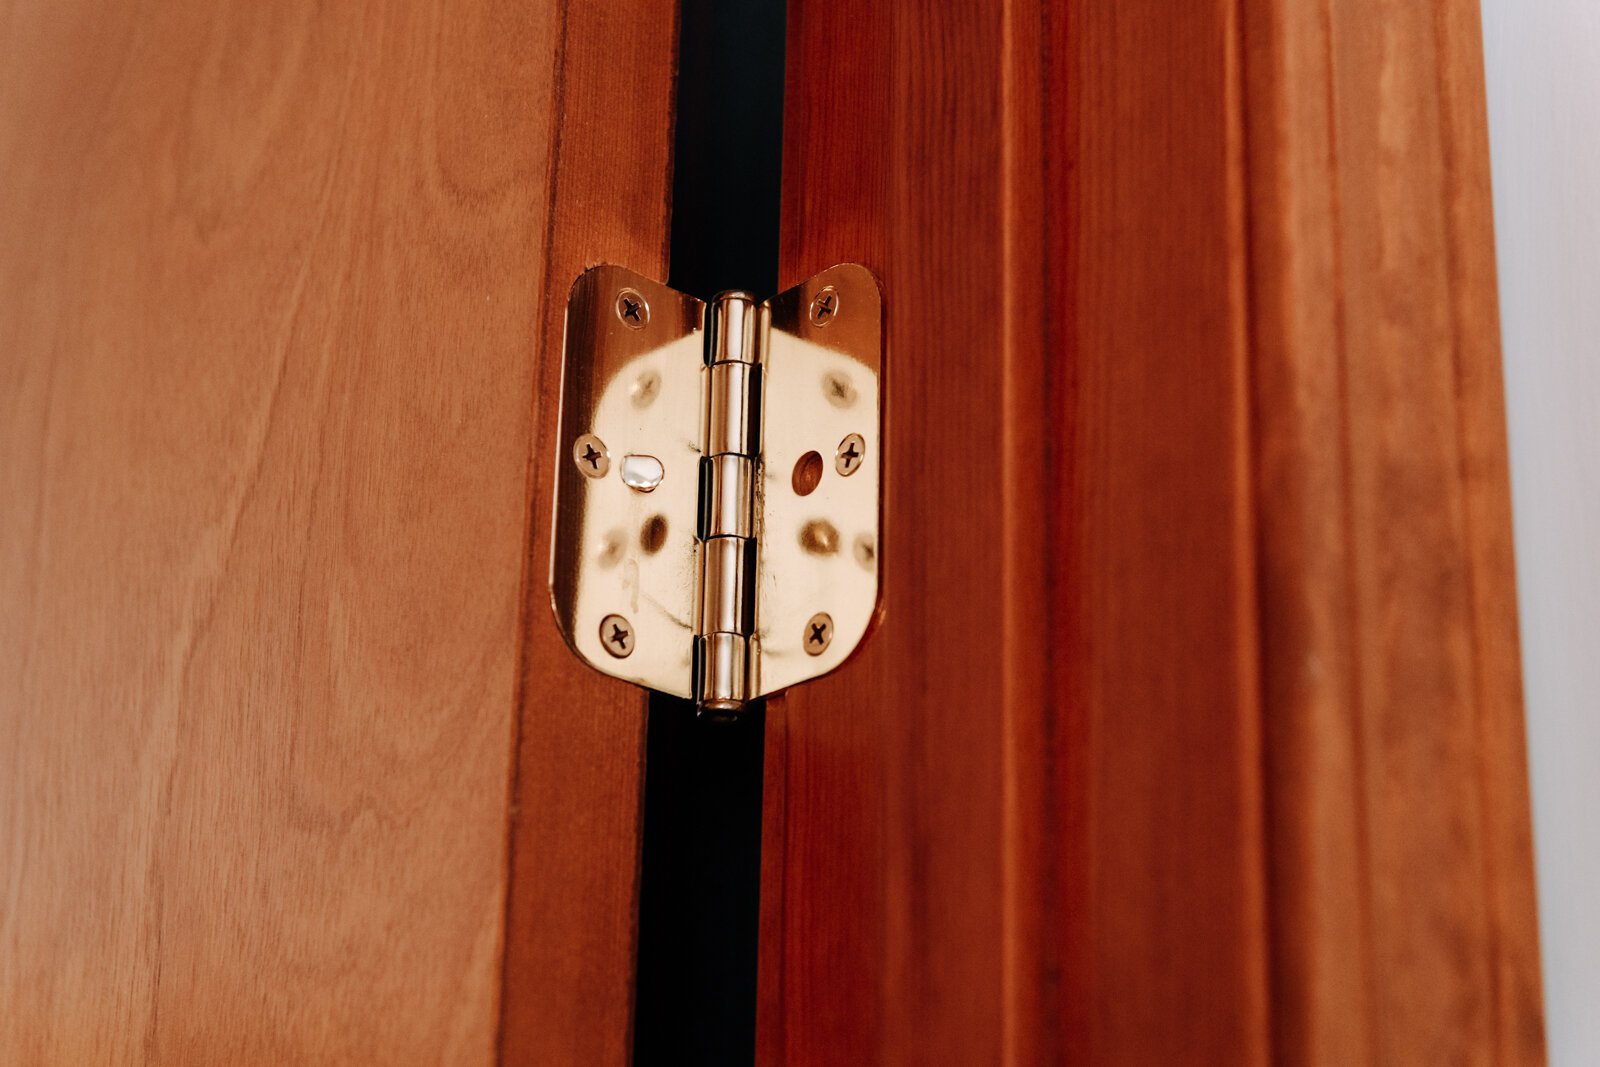 A regular hinge on Ron Duchovic's mother-in-law's room.